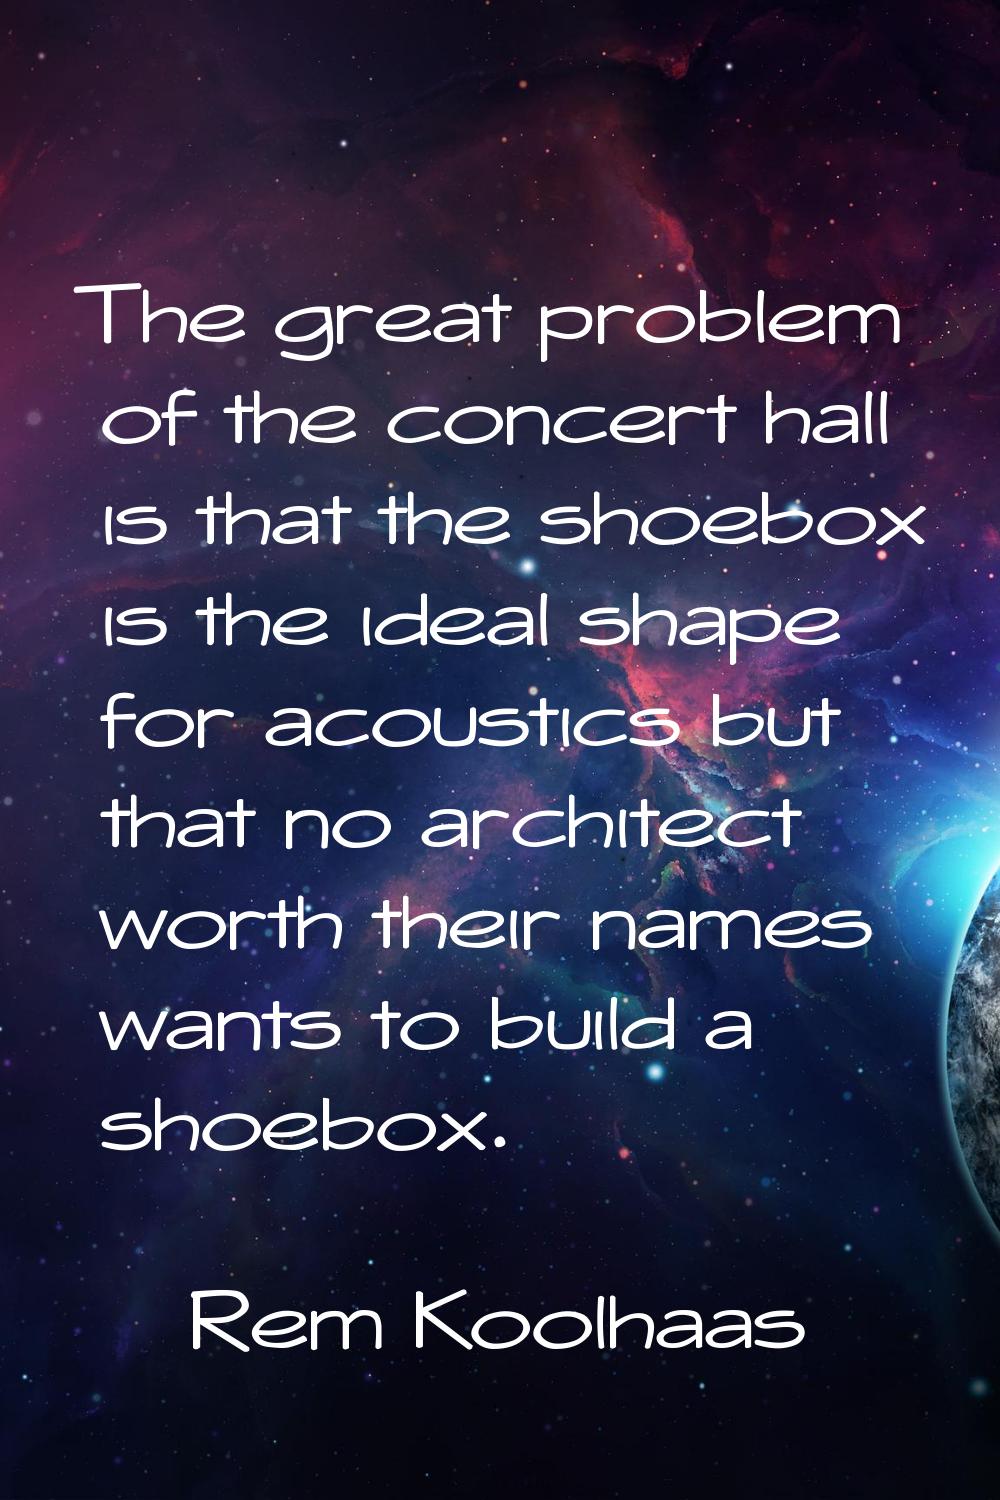 The great problem of the concert hall is that the shoebox is the ideal shape for acoustics but that